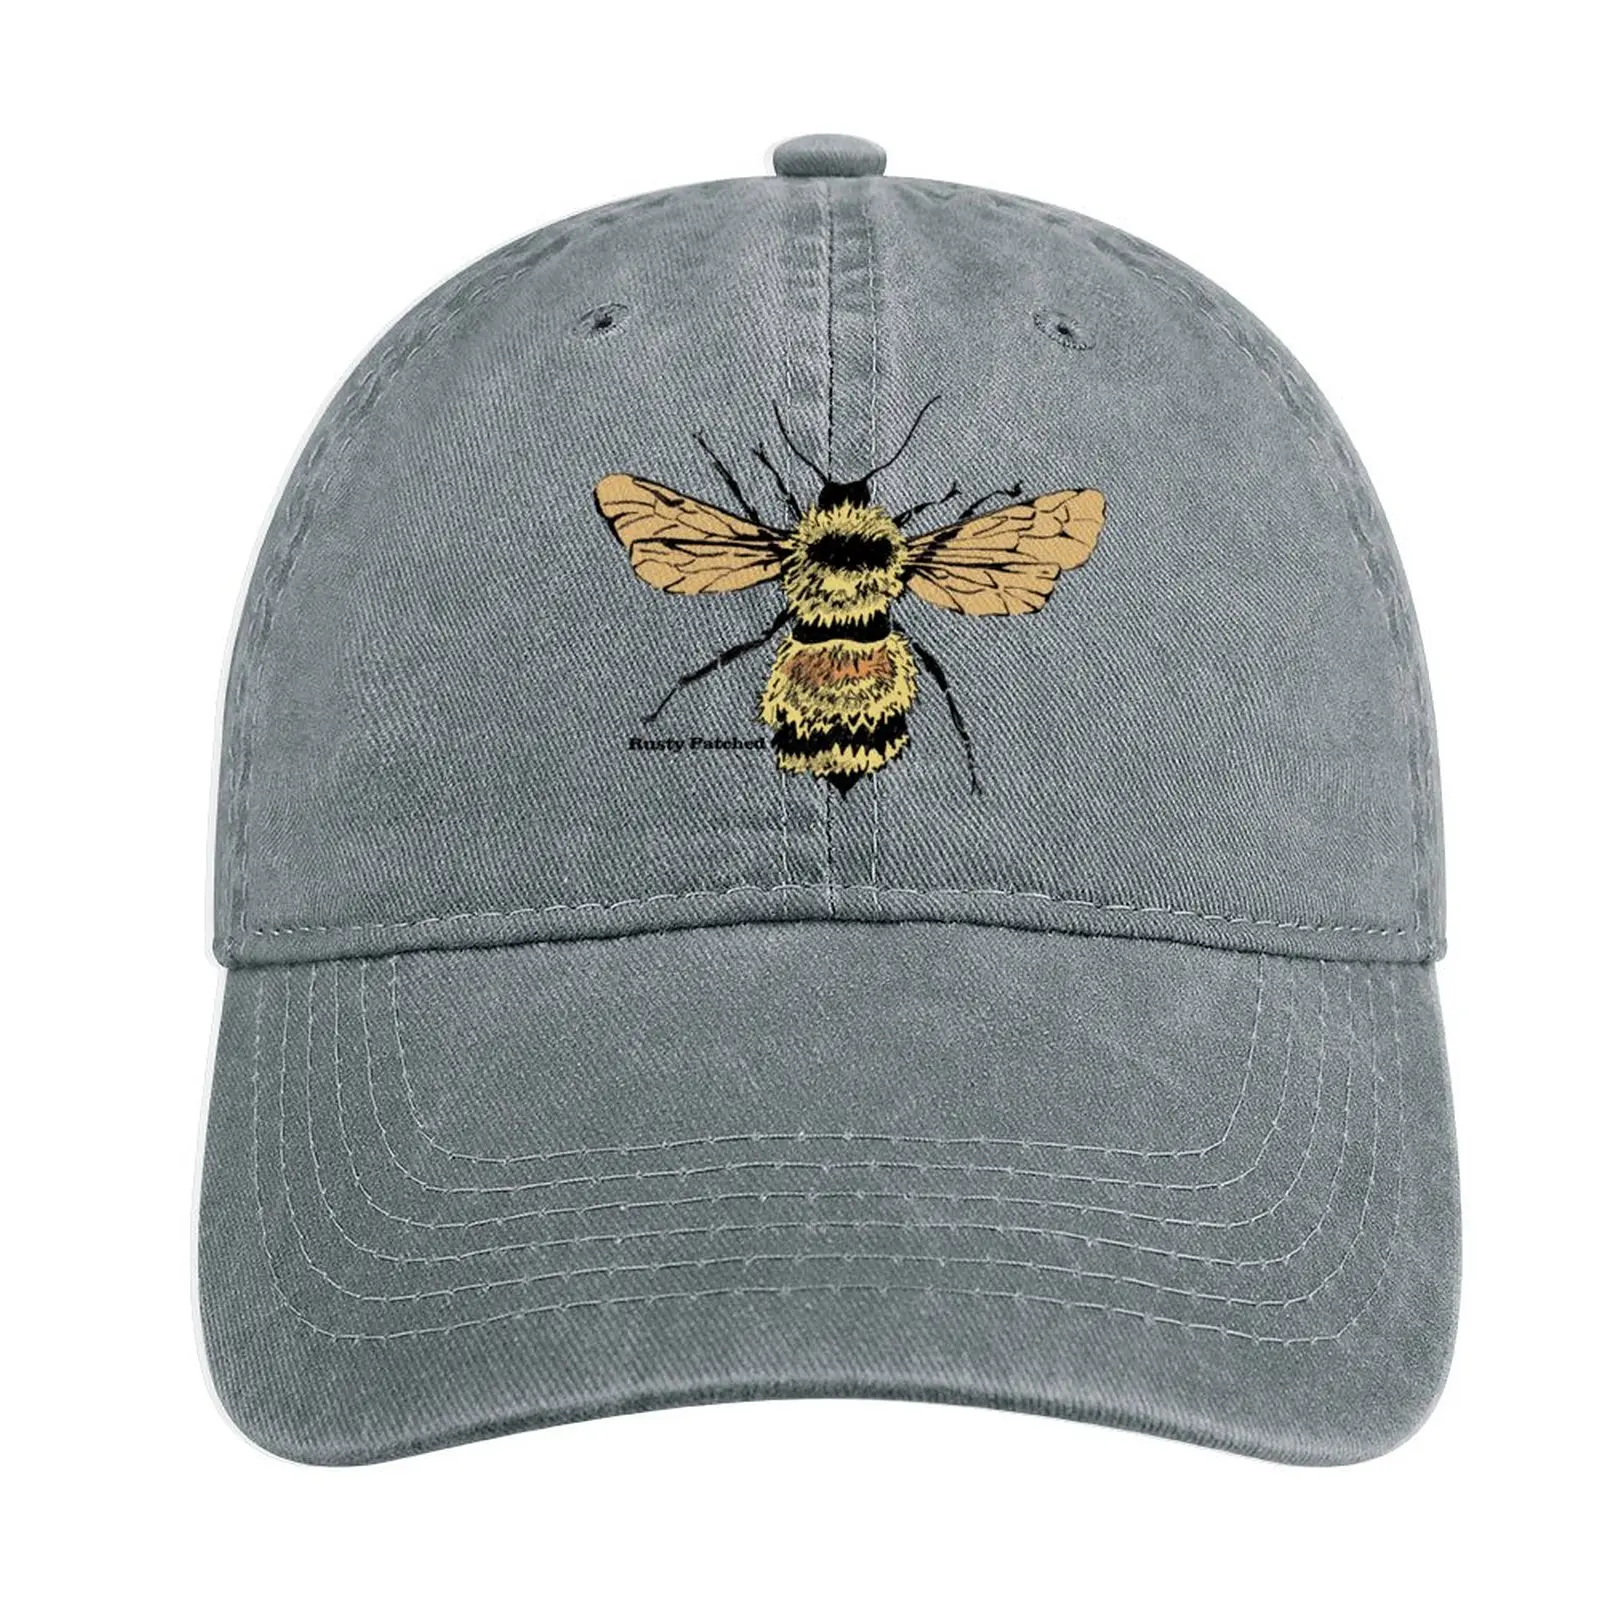 

Endangered Rusty Patched Bumble Bee Cowboy Hat Military Tactical Caps hard hat Hat Women Men'S